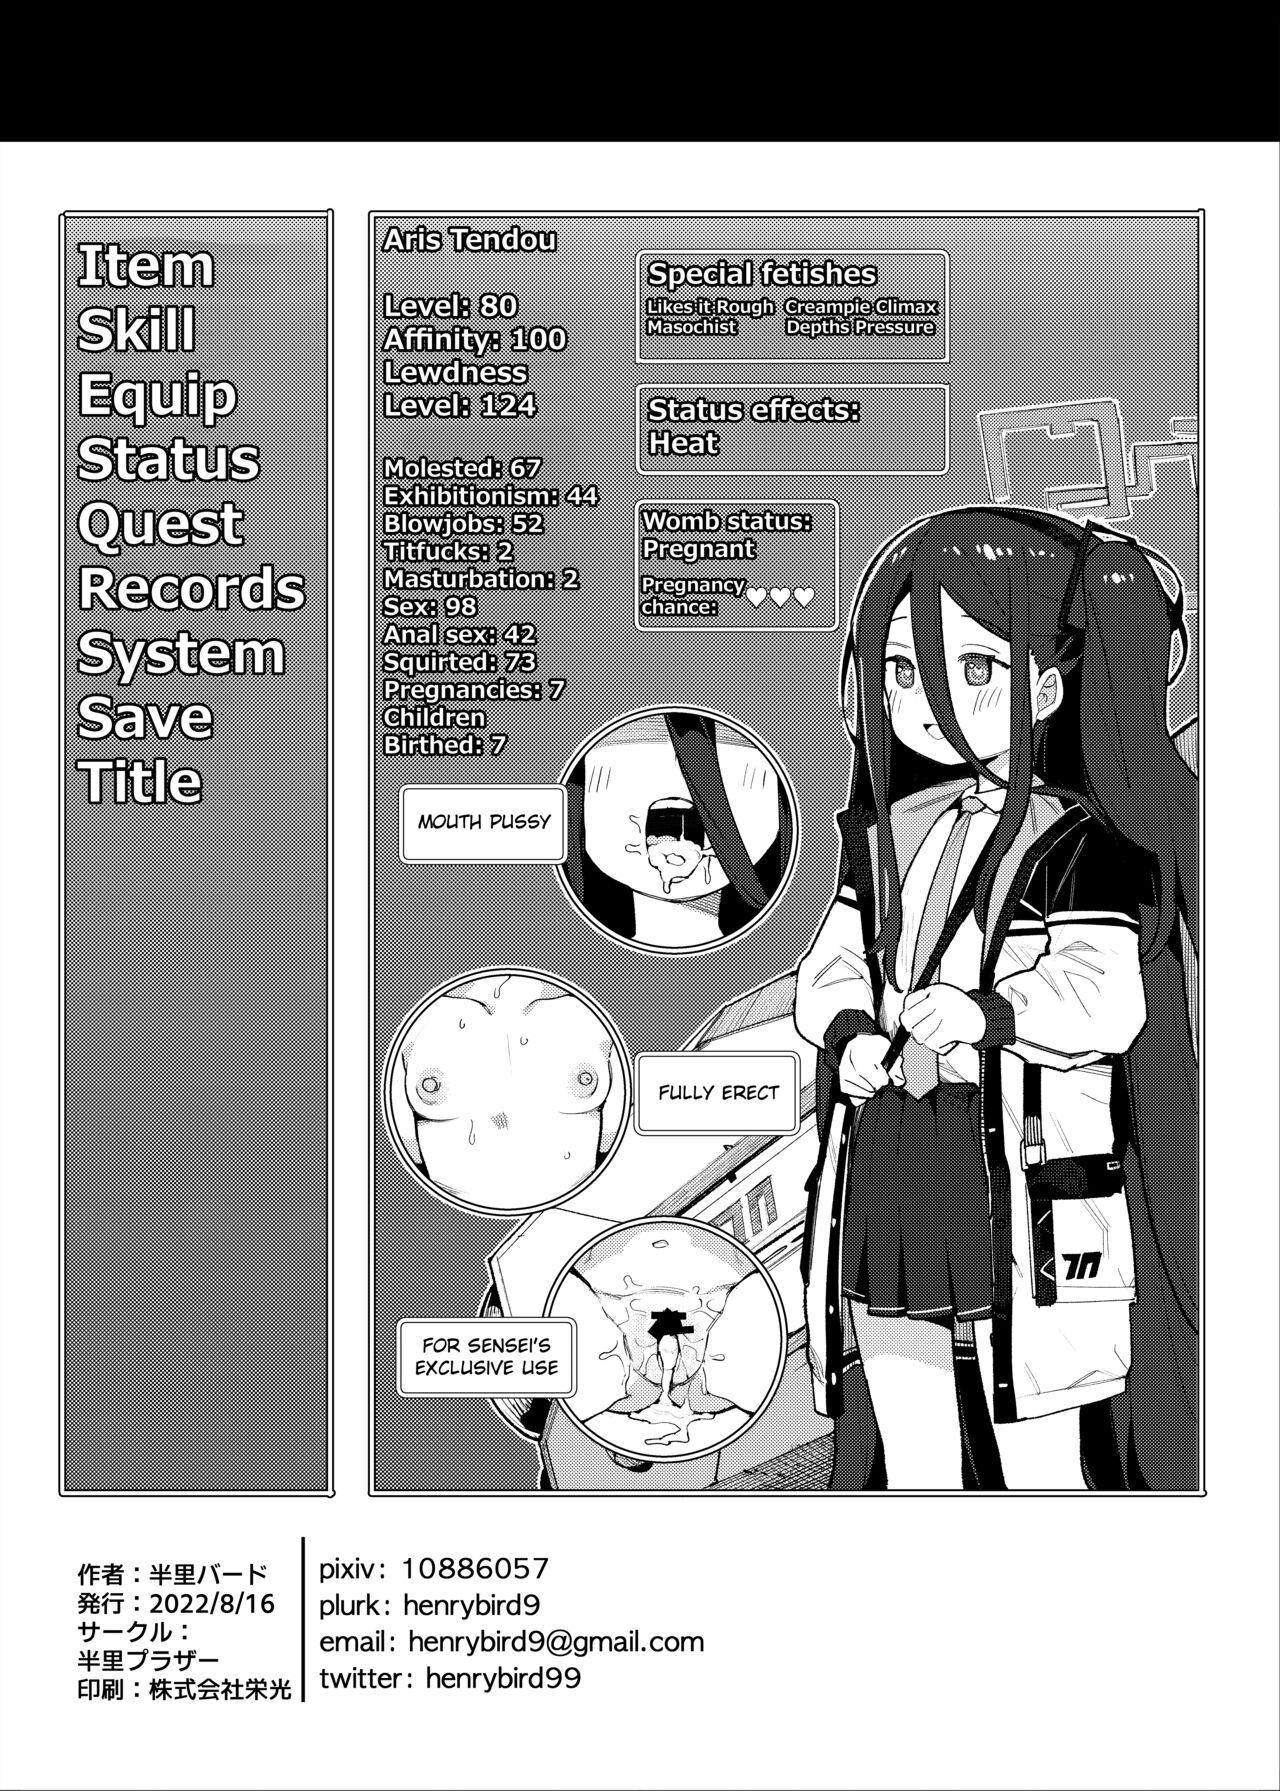 Glamour Aris to Issho ni RPG Gokko Shimashou | Let's Play Pretend RPG With Aris - Blue archive Breasts - Page 25